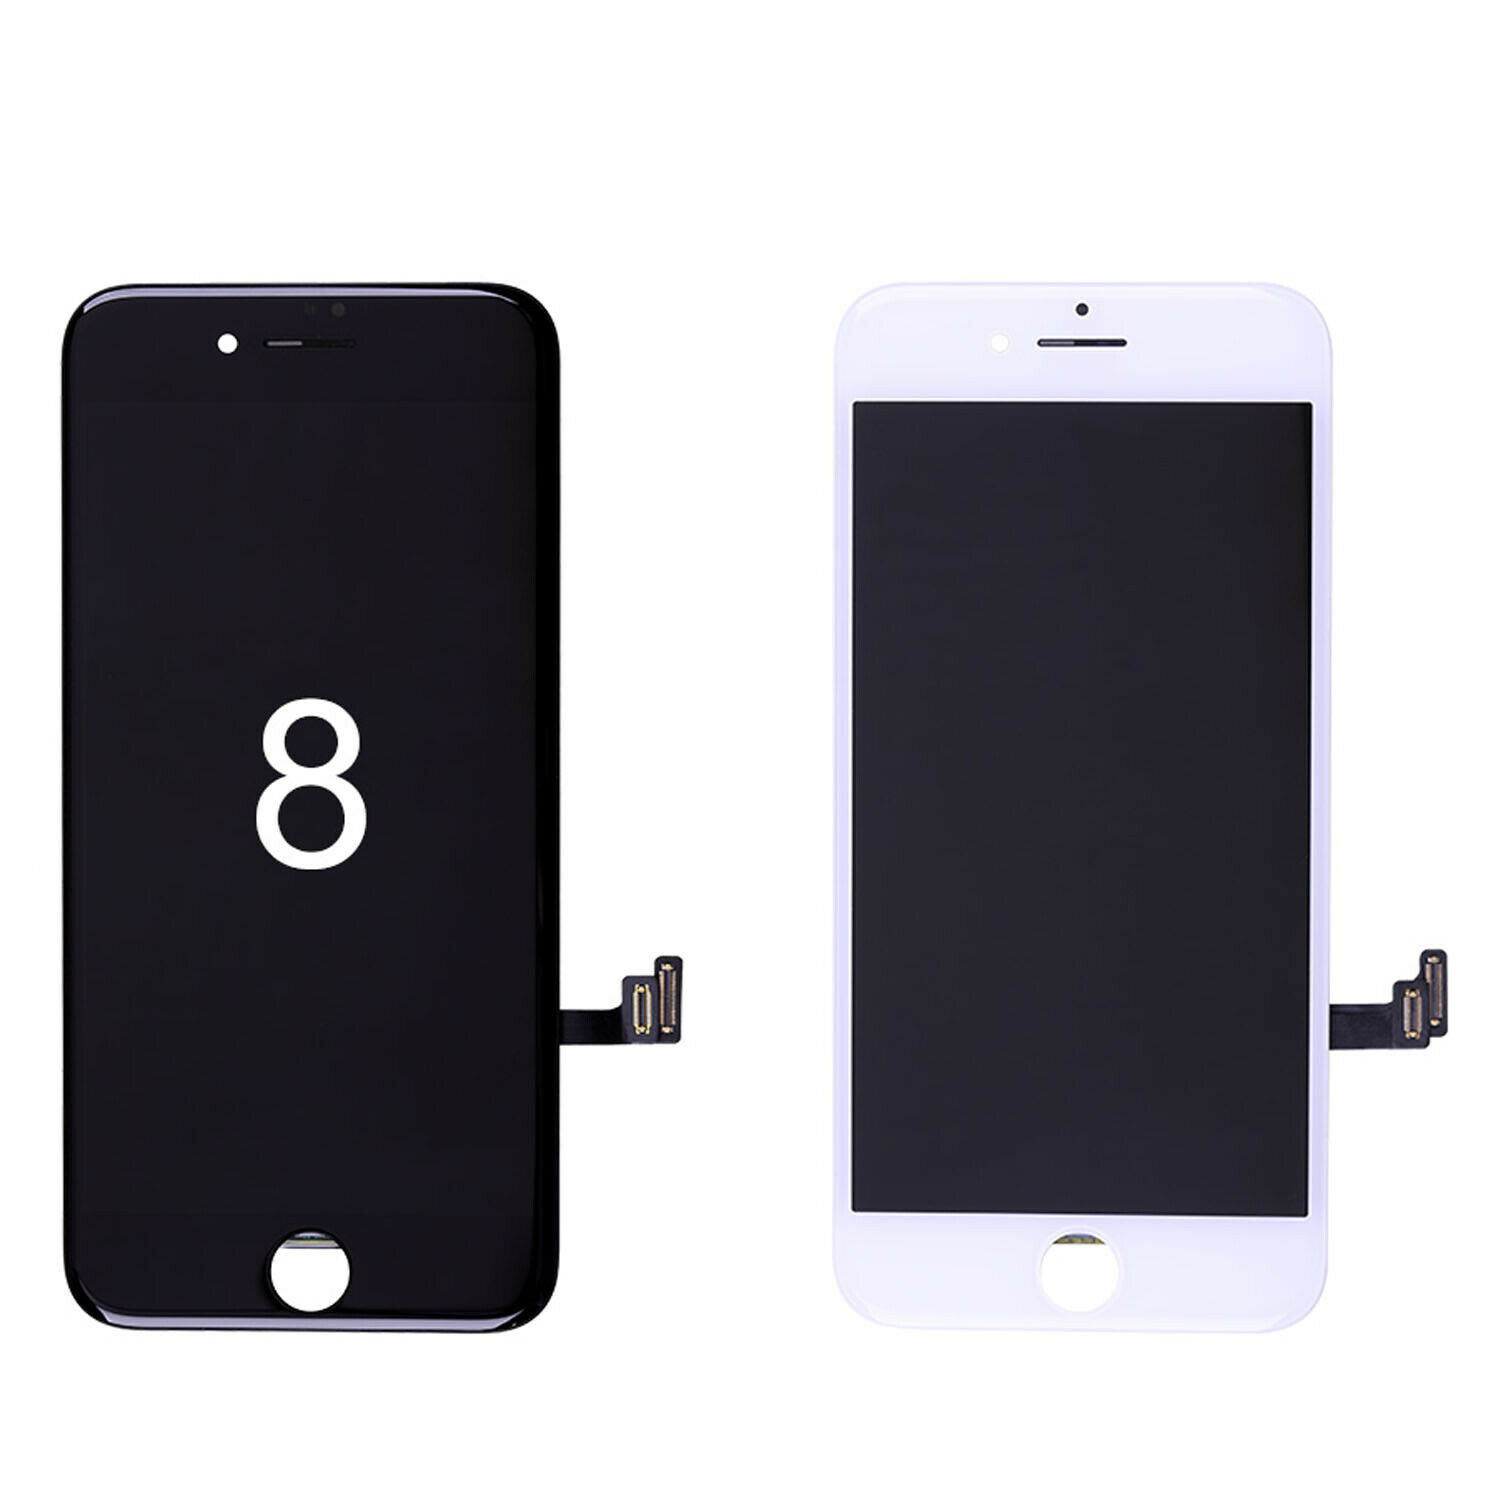 Buy cheap iPhone 8 A1863 A1905 Iphone LCD Screen product